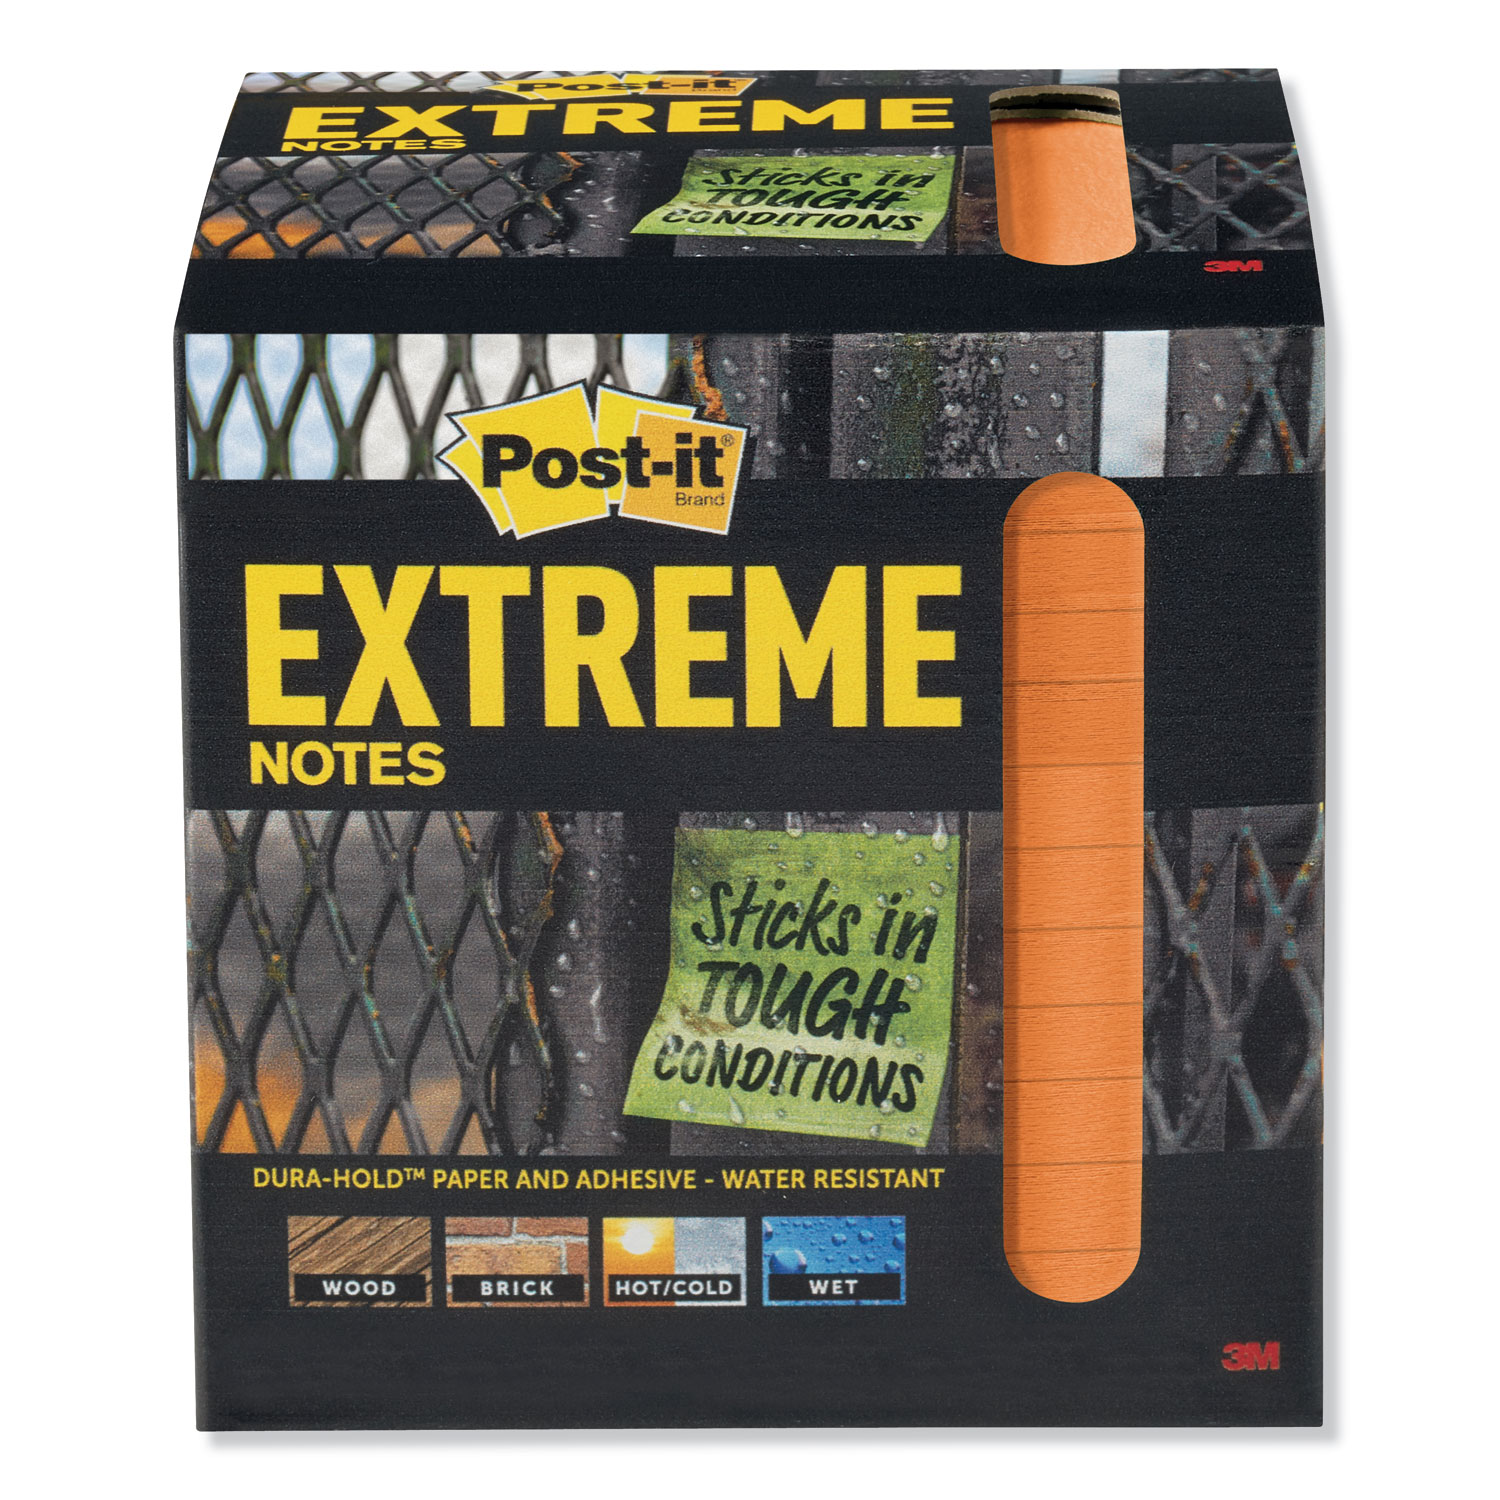  Post-it Extreme Notes XTRM3312TRYO Water-Resistant Self-Stick Notes, Orange, 3 x 3, 45 Sheets, 12/Pack (MMMXTRM3312TRYO) 